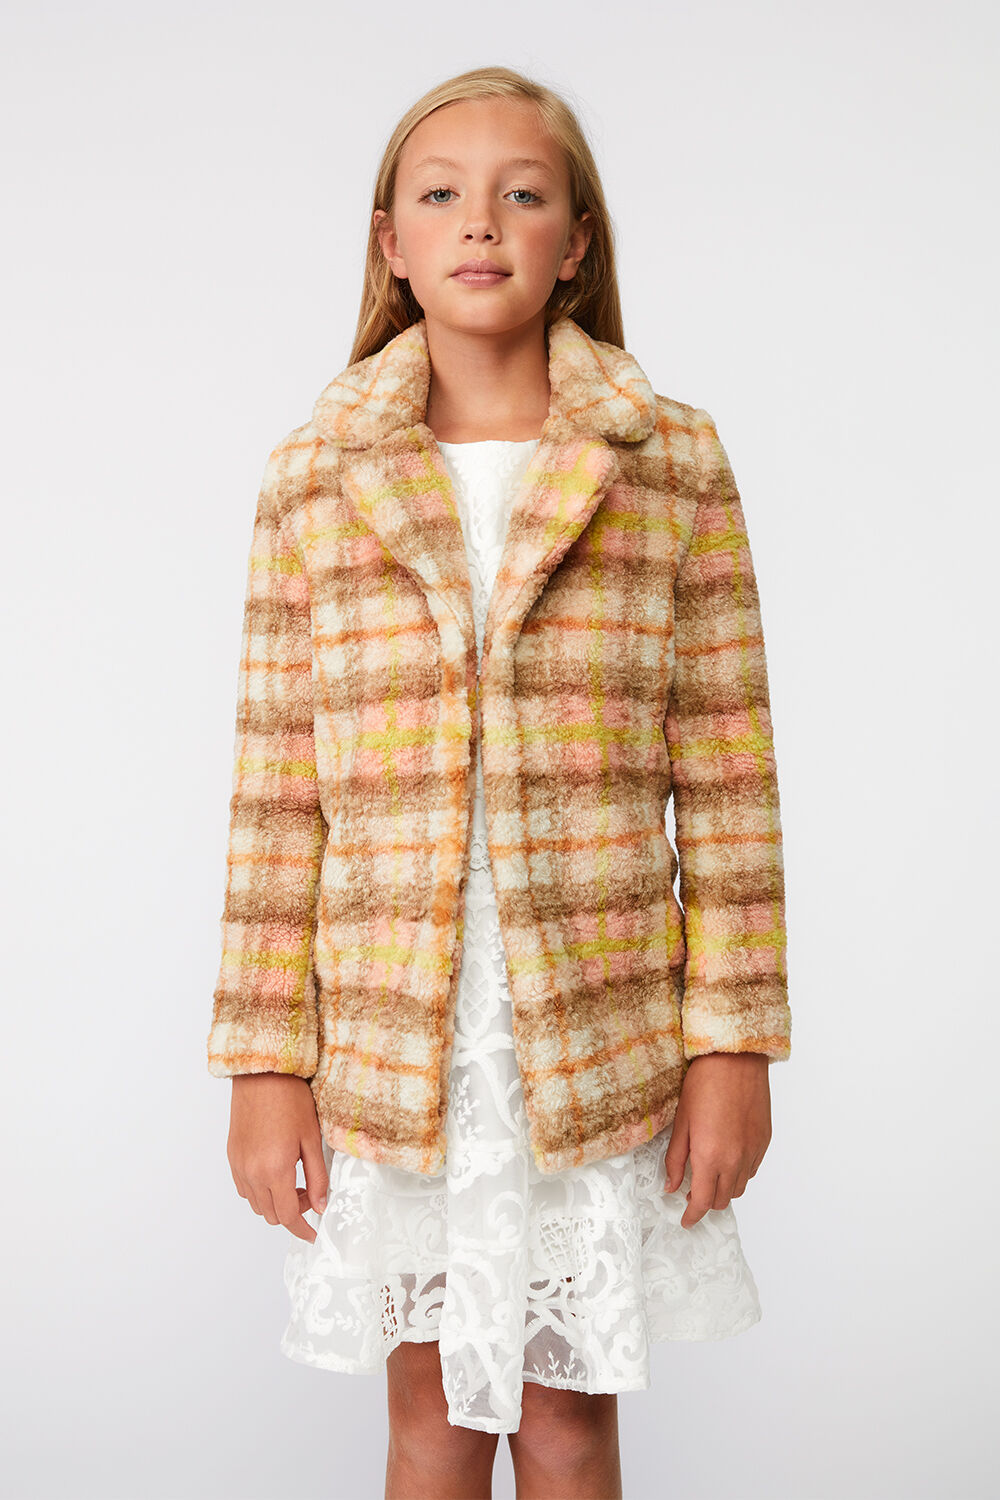 GIRLS CHECK FUR COAT in colour COCOA BROWN